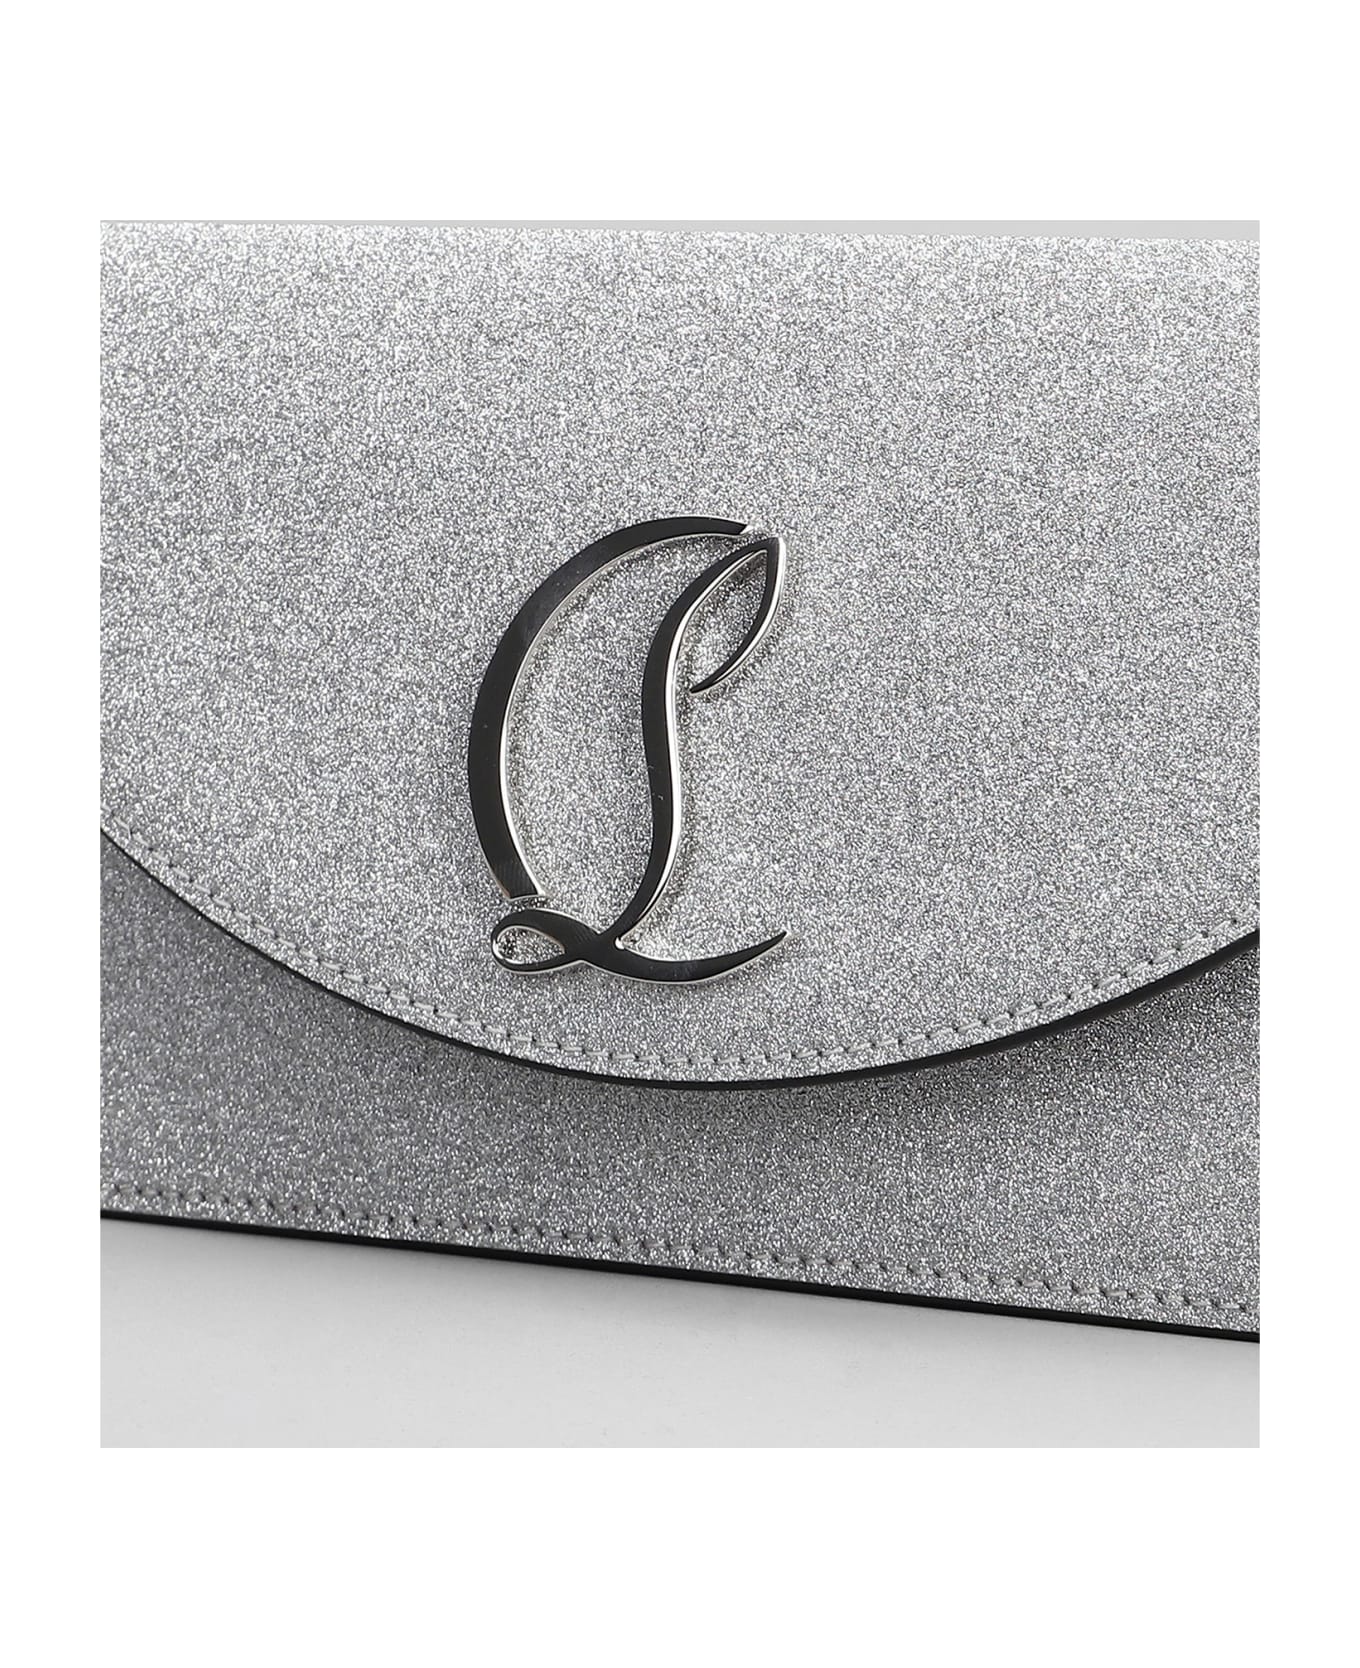 Christian Louboutin Loubi54 Hand Bag In Silver Glitter - silver クラッチバッグ